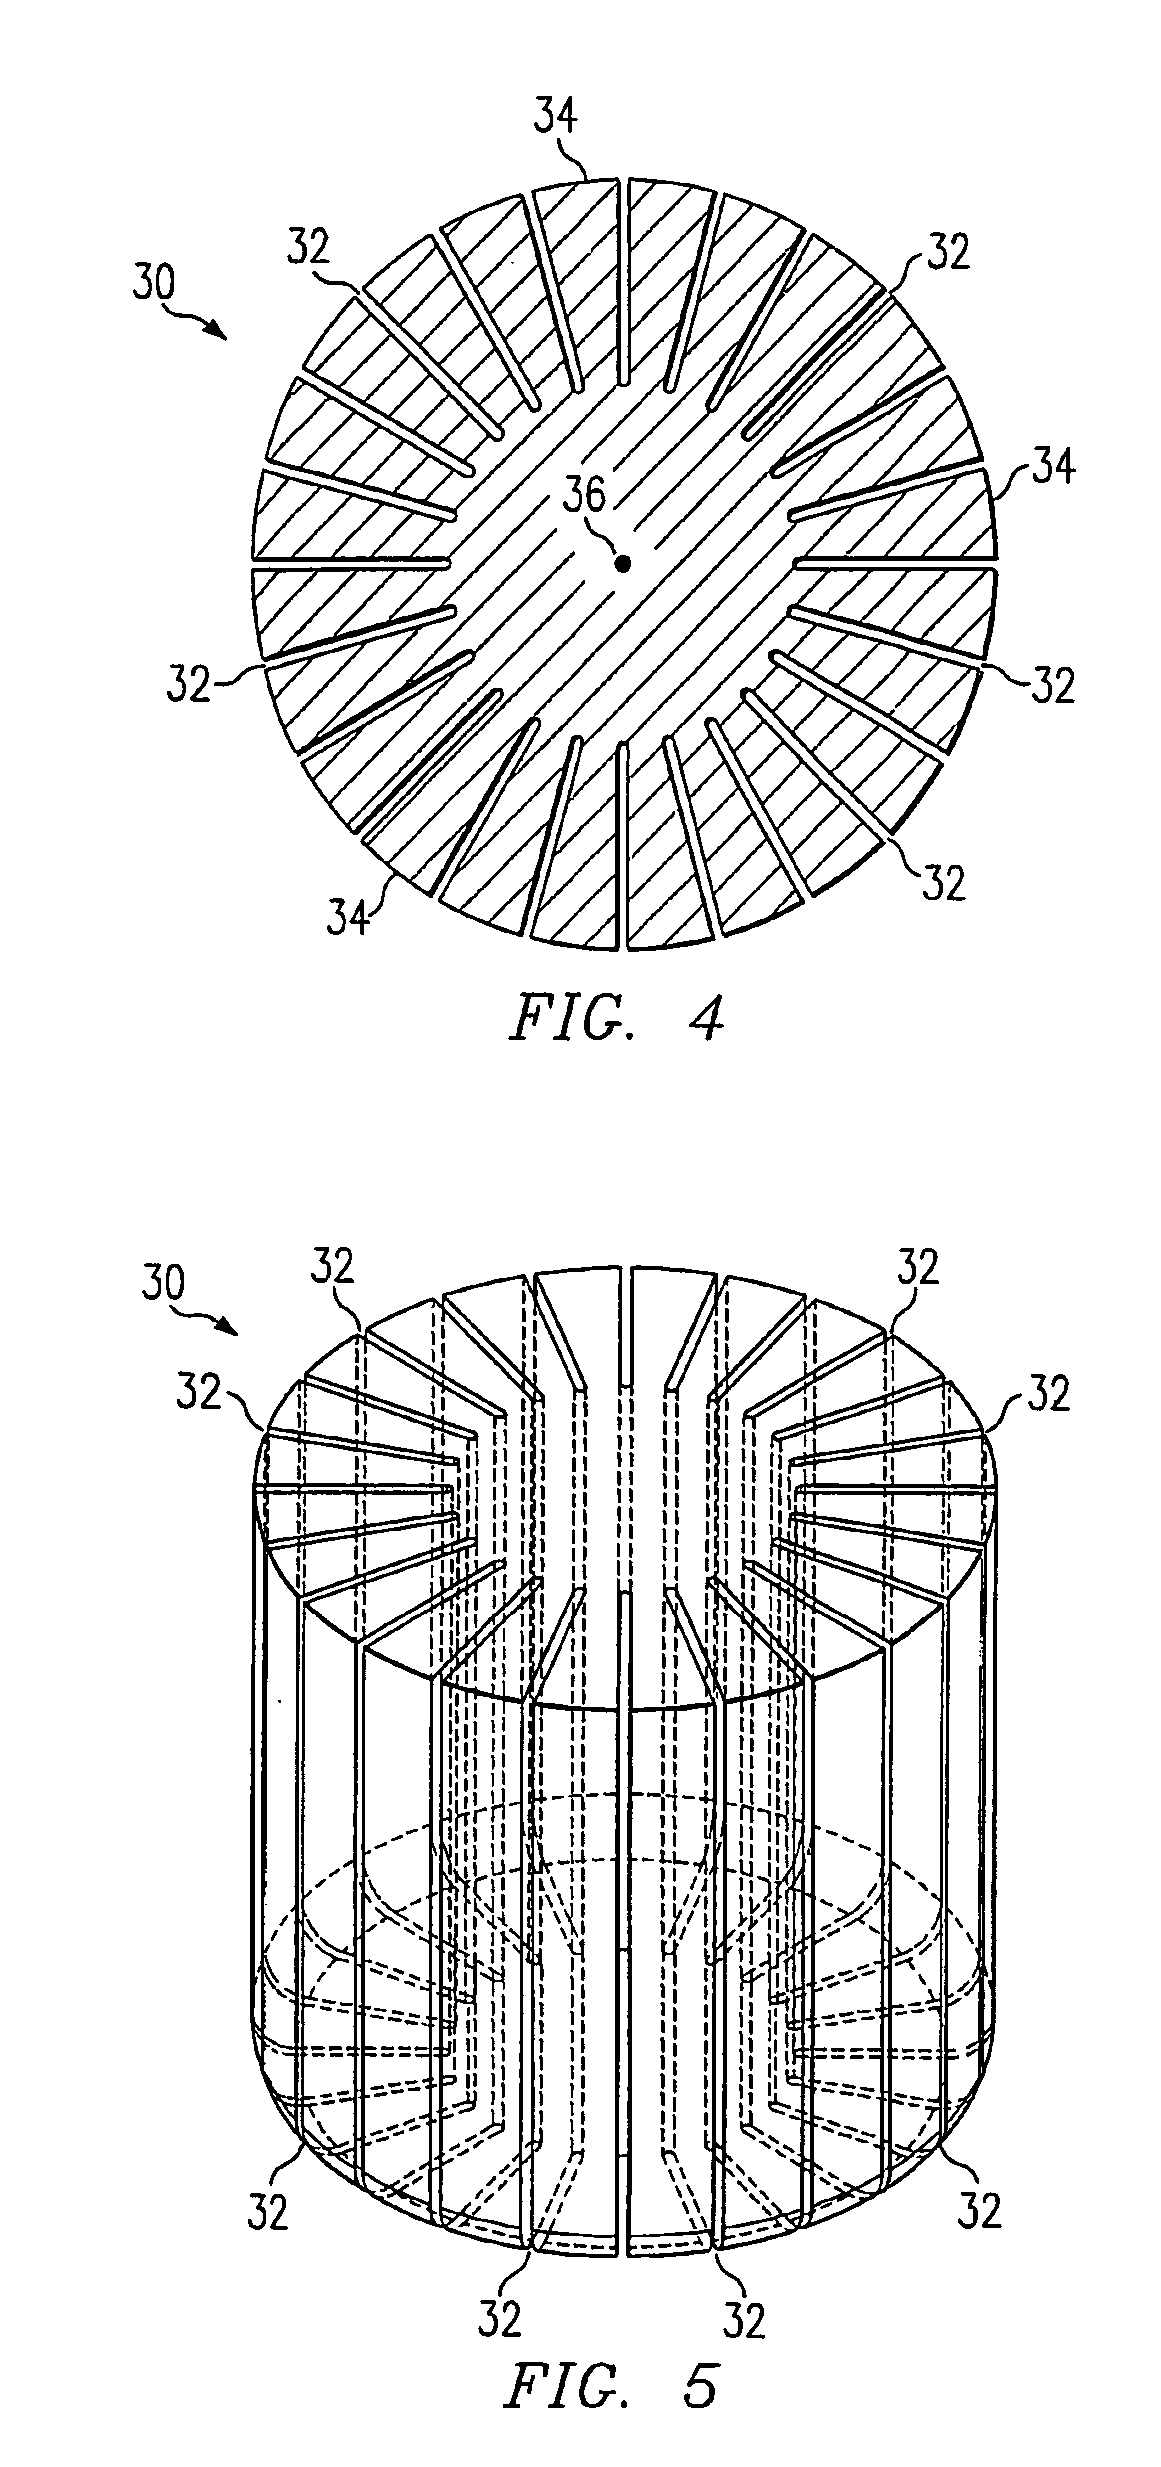 Slotted flow restrictor for a mass flow meter